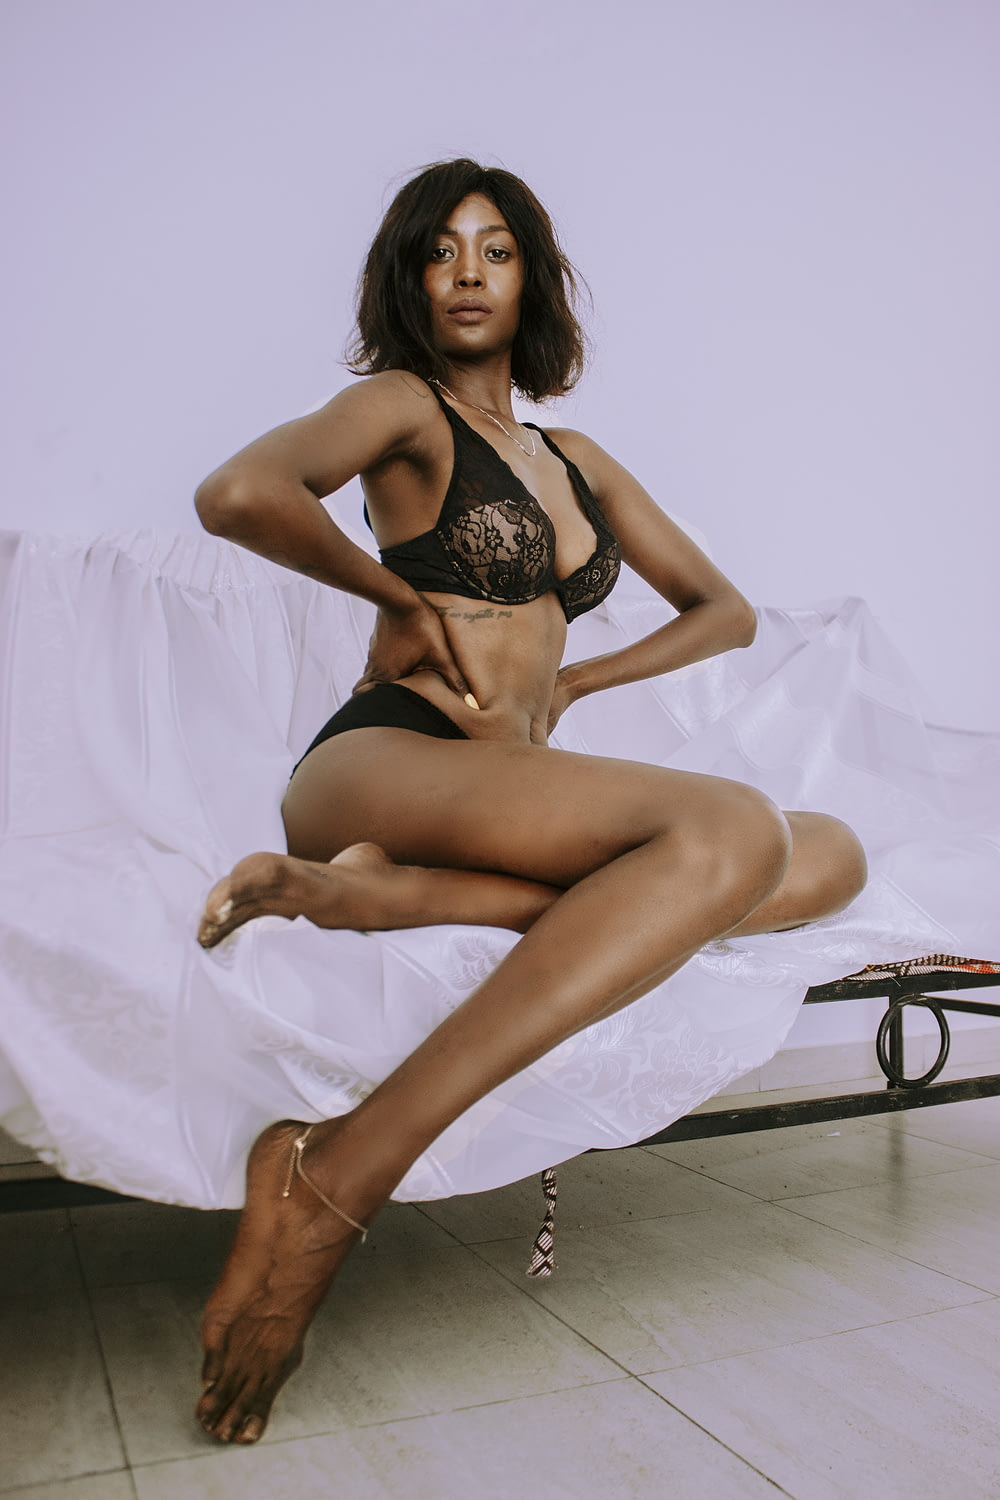 a woman in a black lingerie sitting on a bed